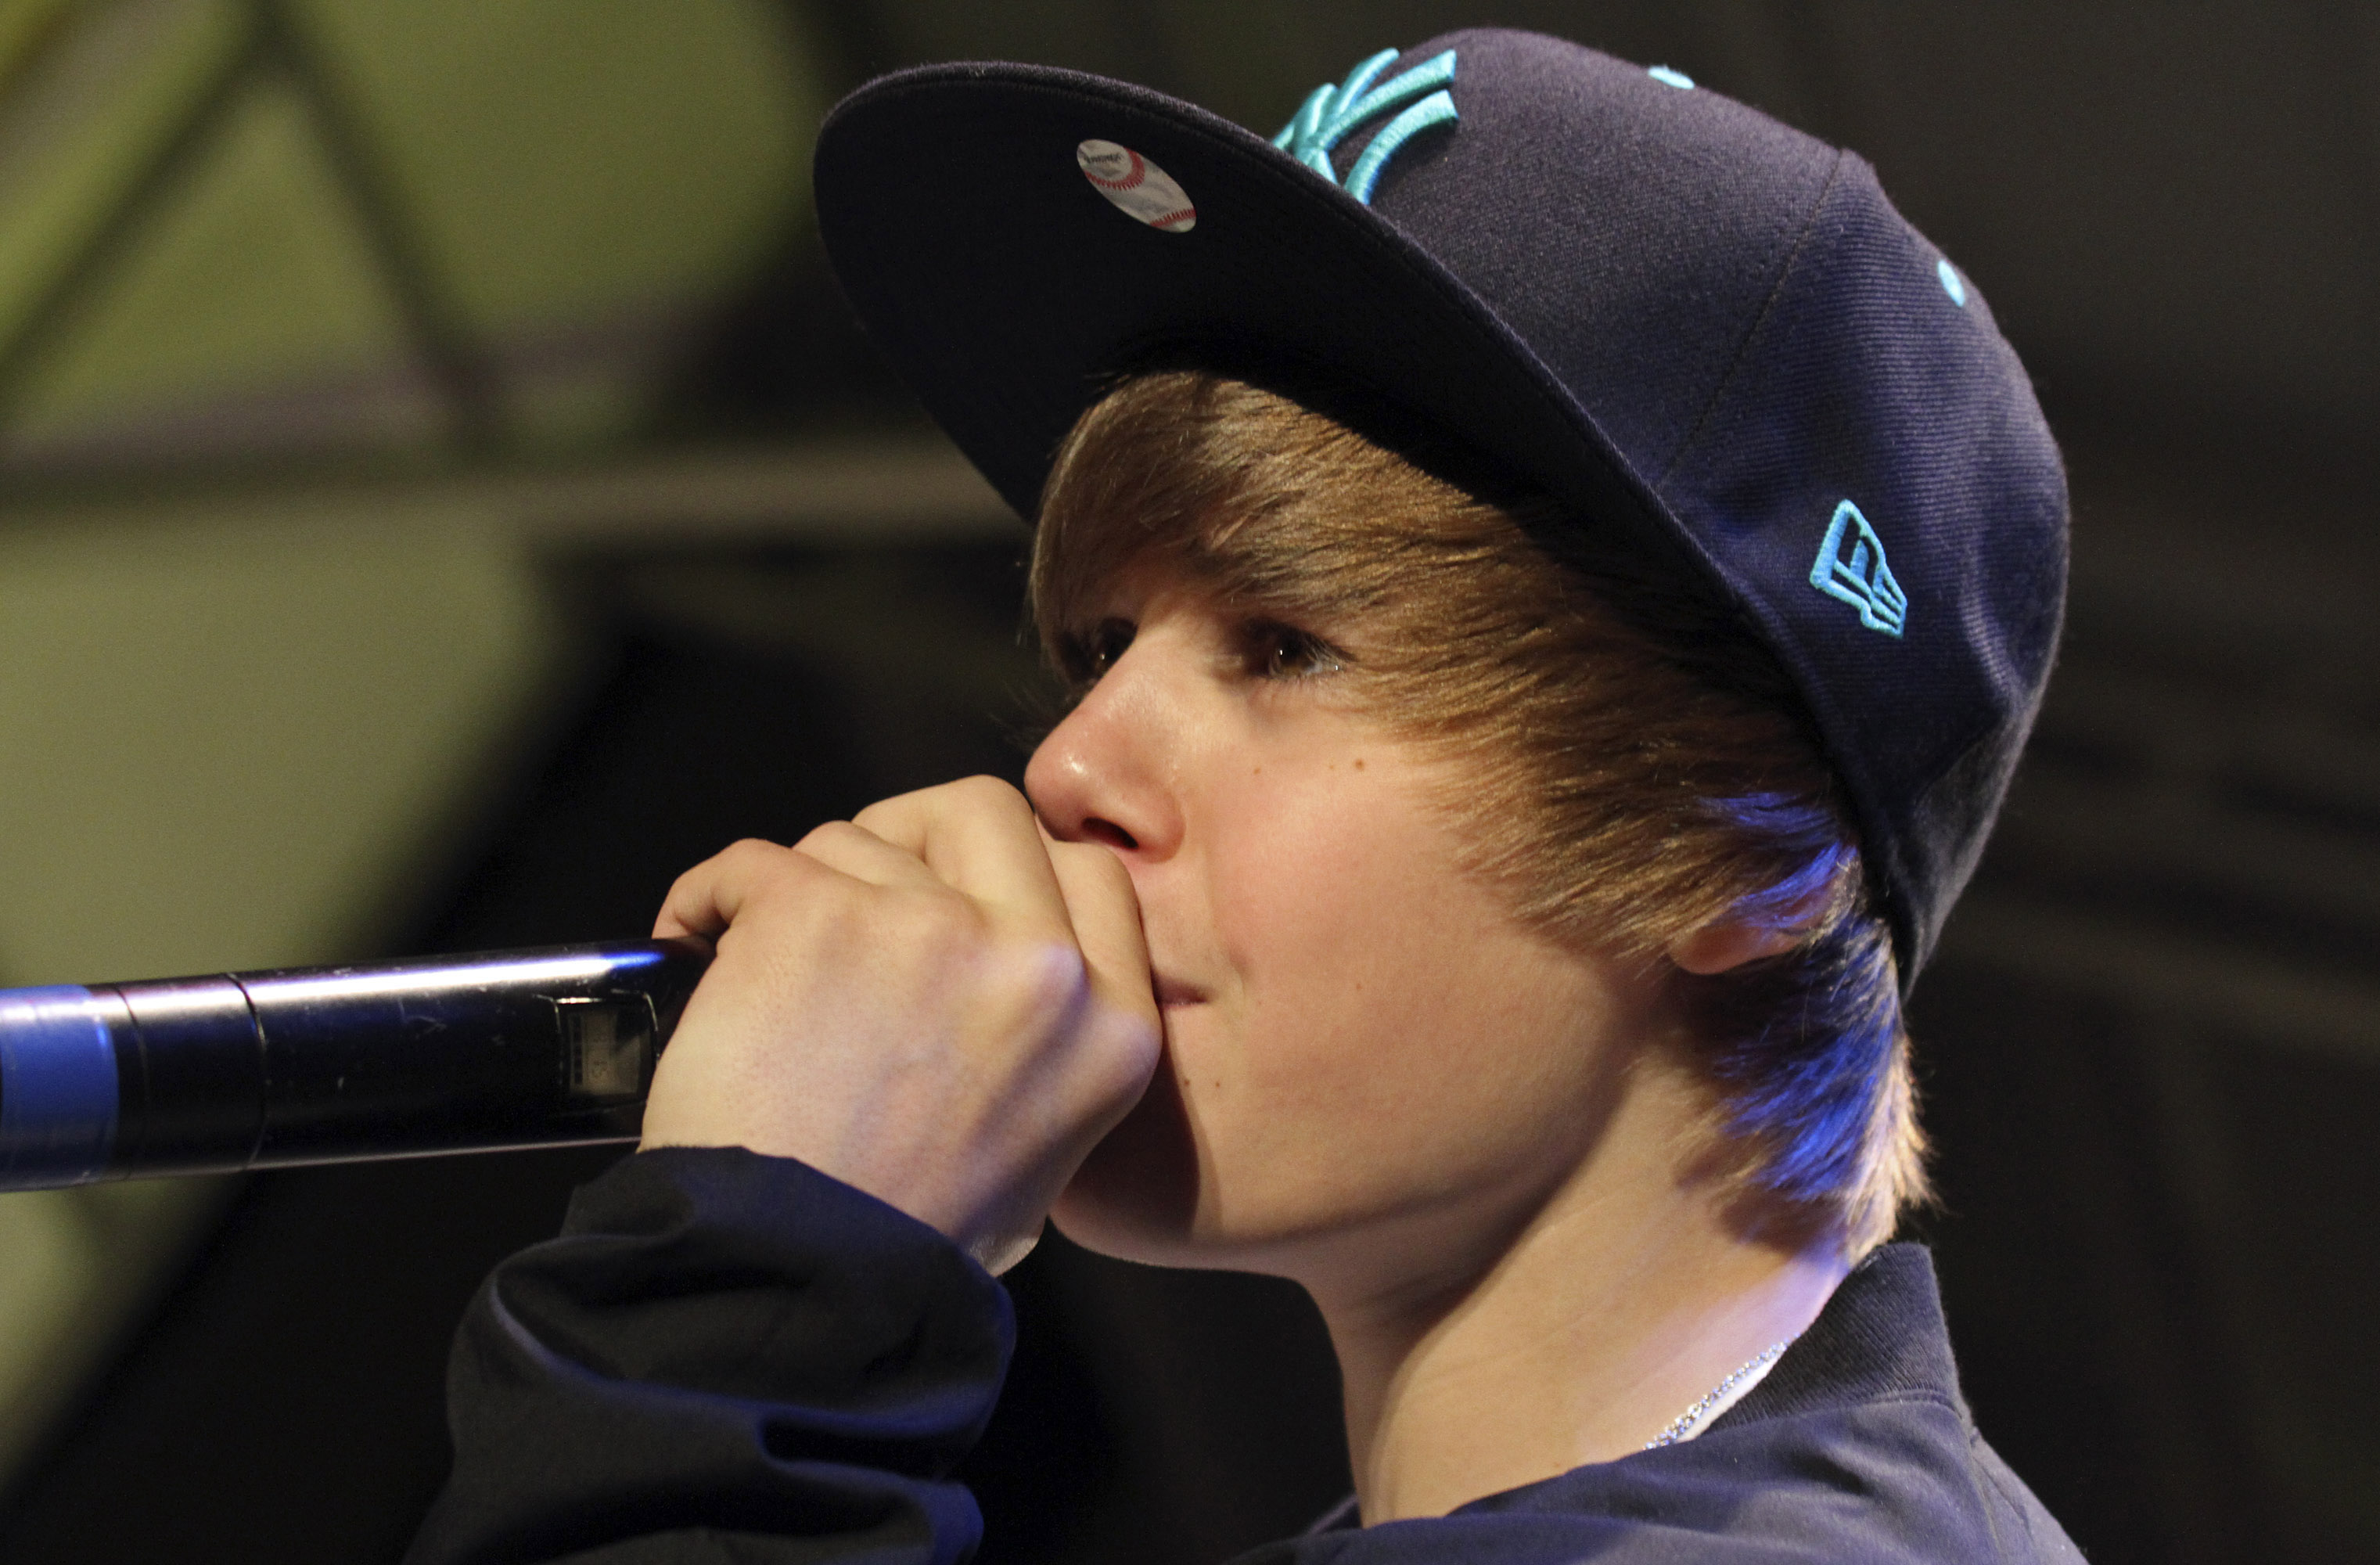 Justin Bieber performing at Citadel Outlets in the City of Commerce, California, on December 14, 2009 | Source: Getty Images